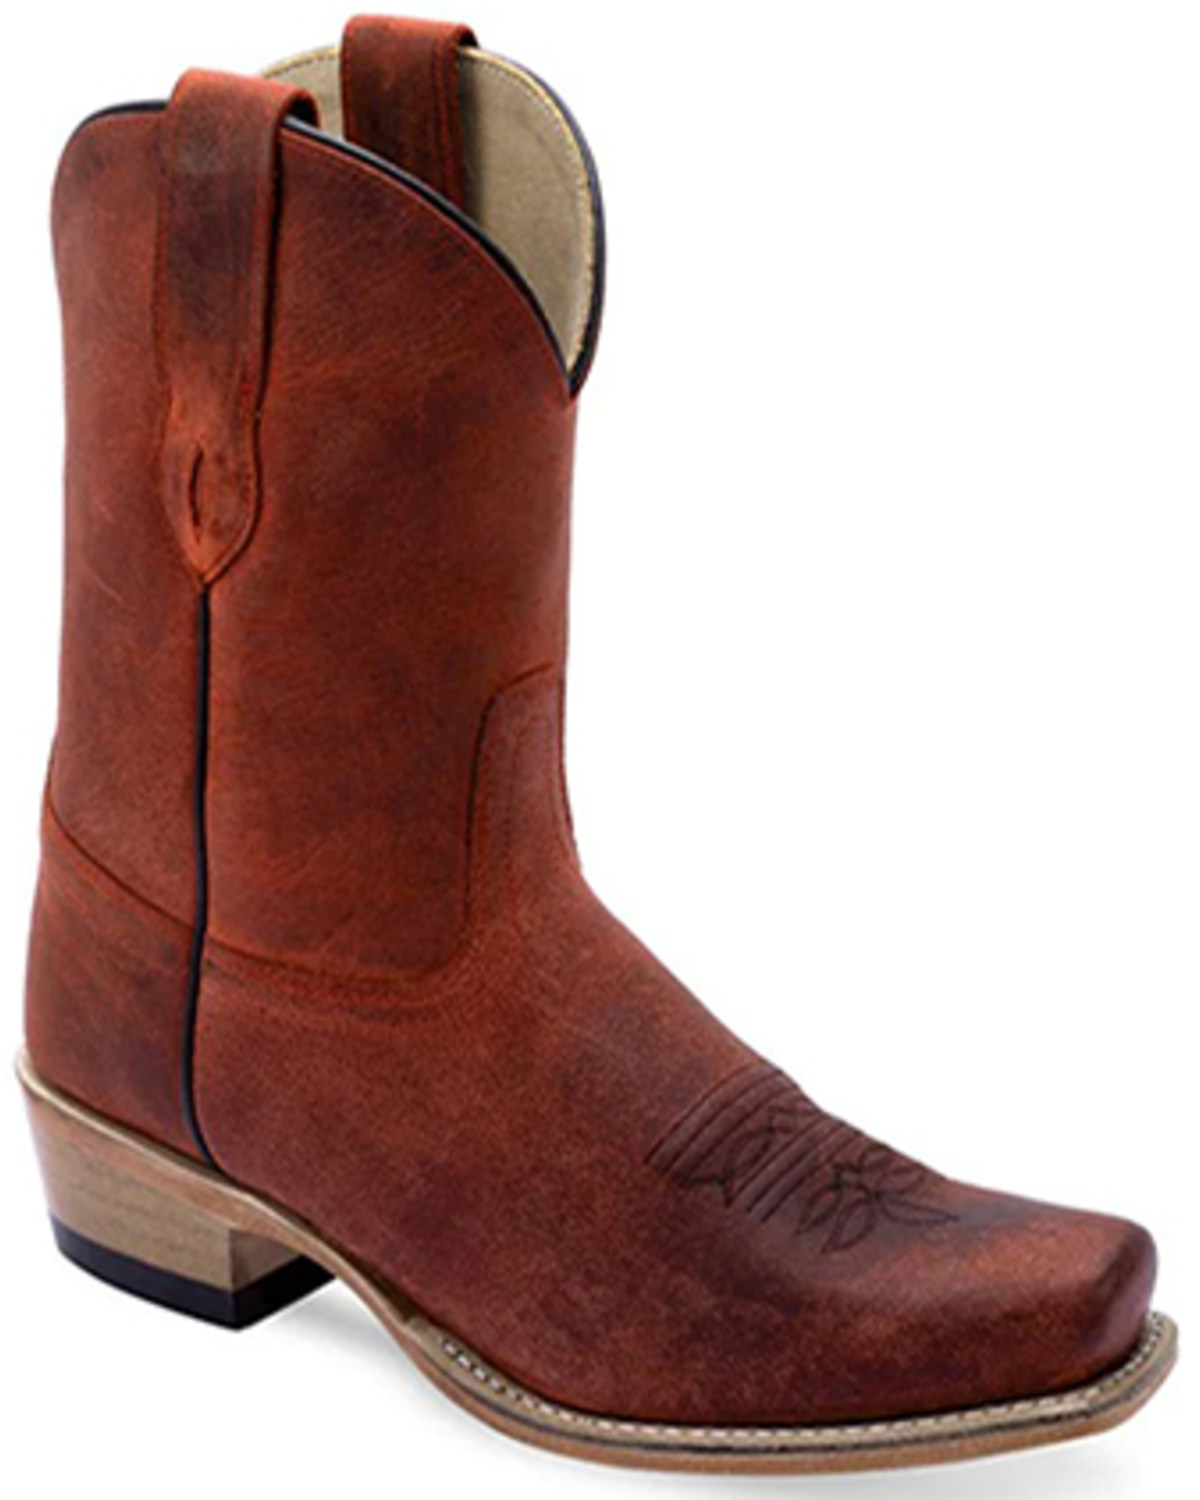 Old West Women's Short Western Boots - Square Toe